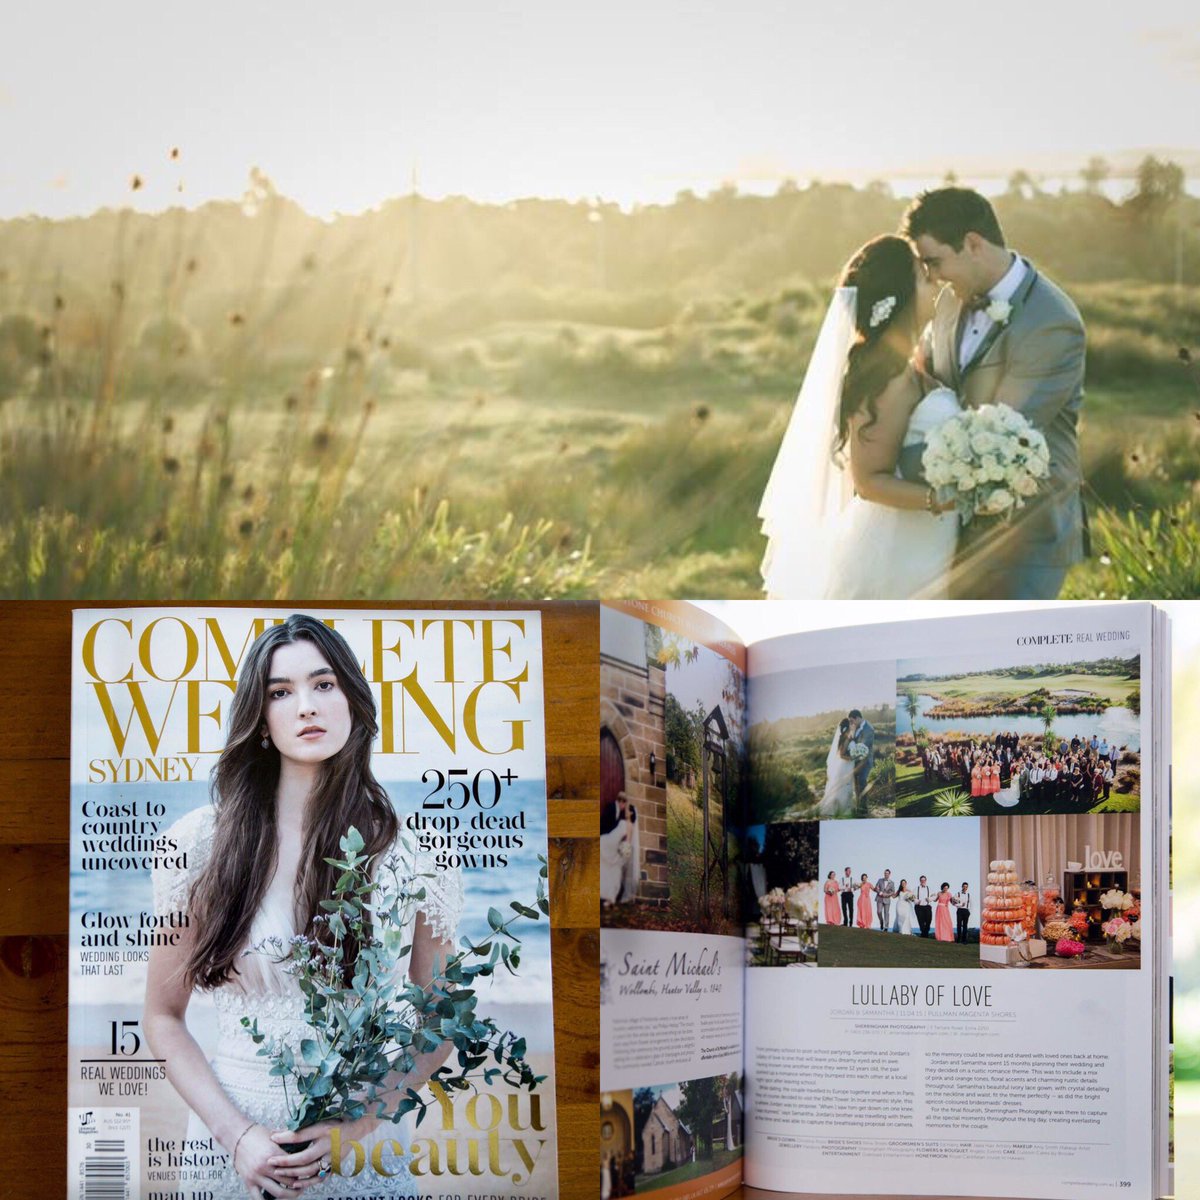 We were featured in the latest edition of Complete Wedding Magazine! Thank you Sherringham Photography!